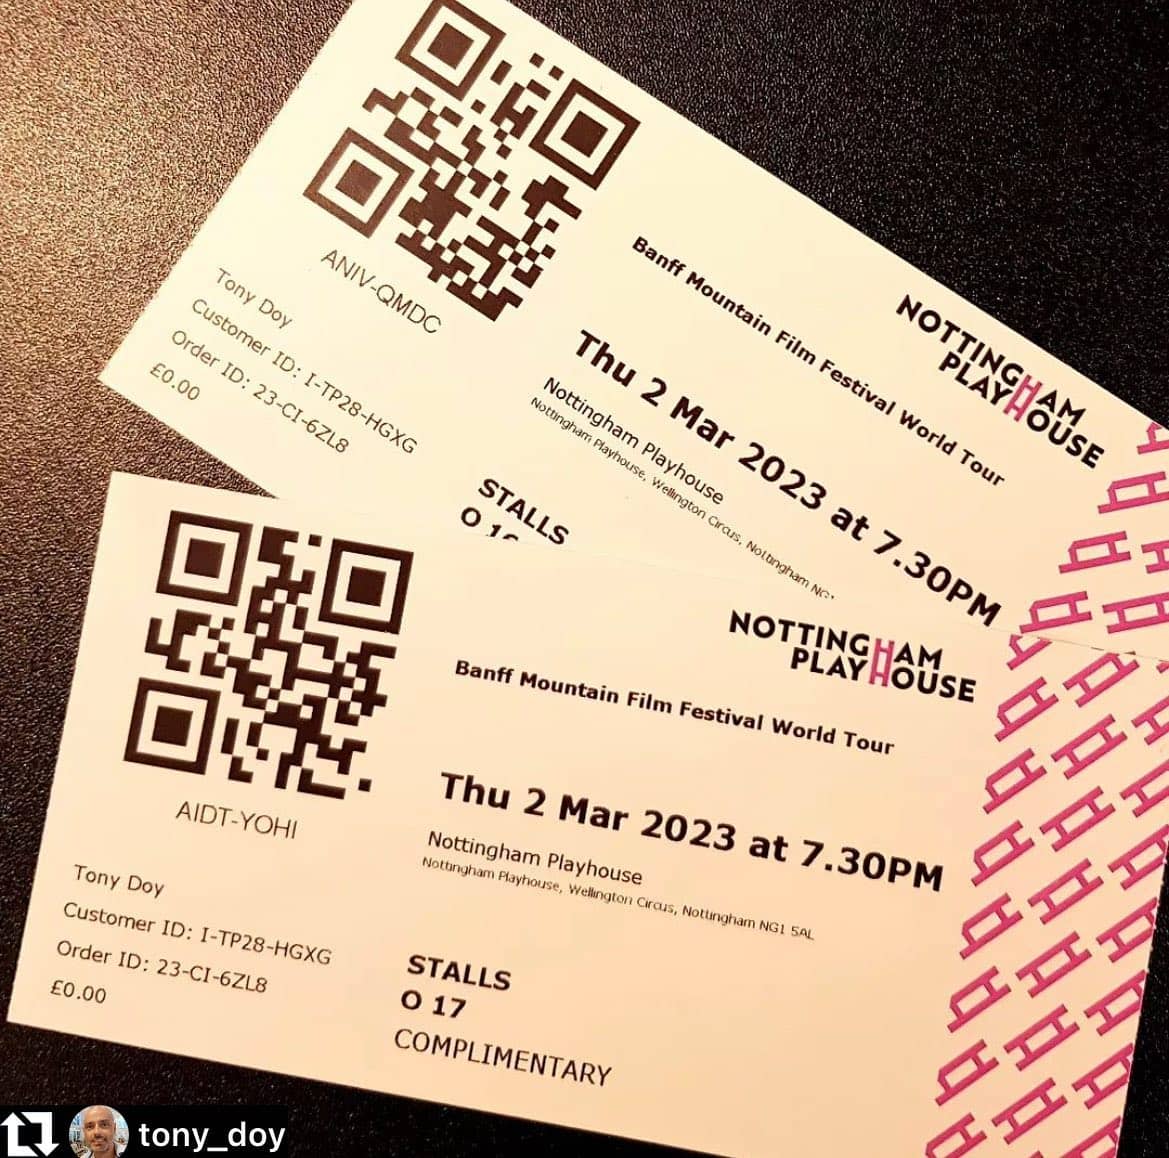 Repost from @tony_doy 

Tony enjoyed the Banff Film Festival World Tour - you can too this Friday...